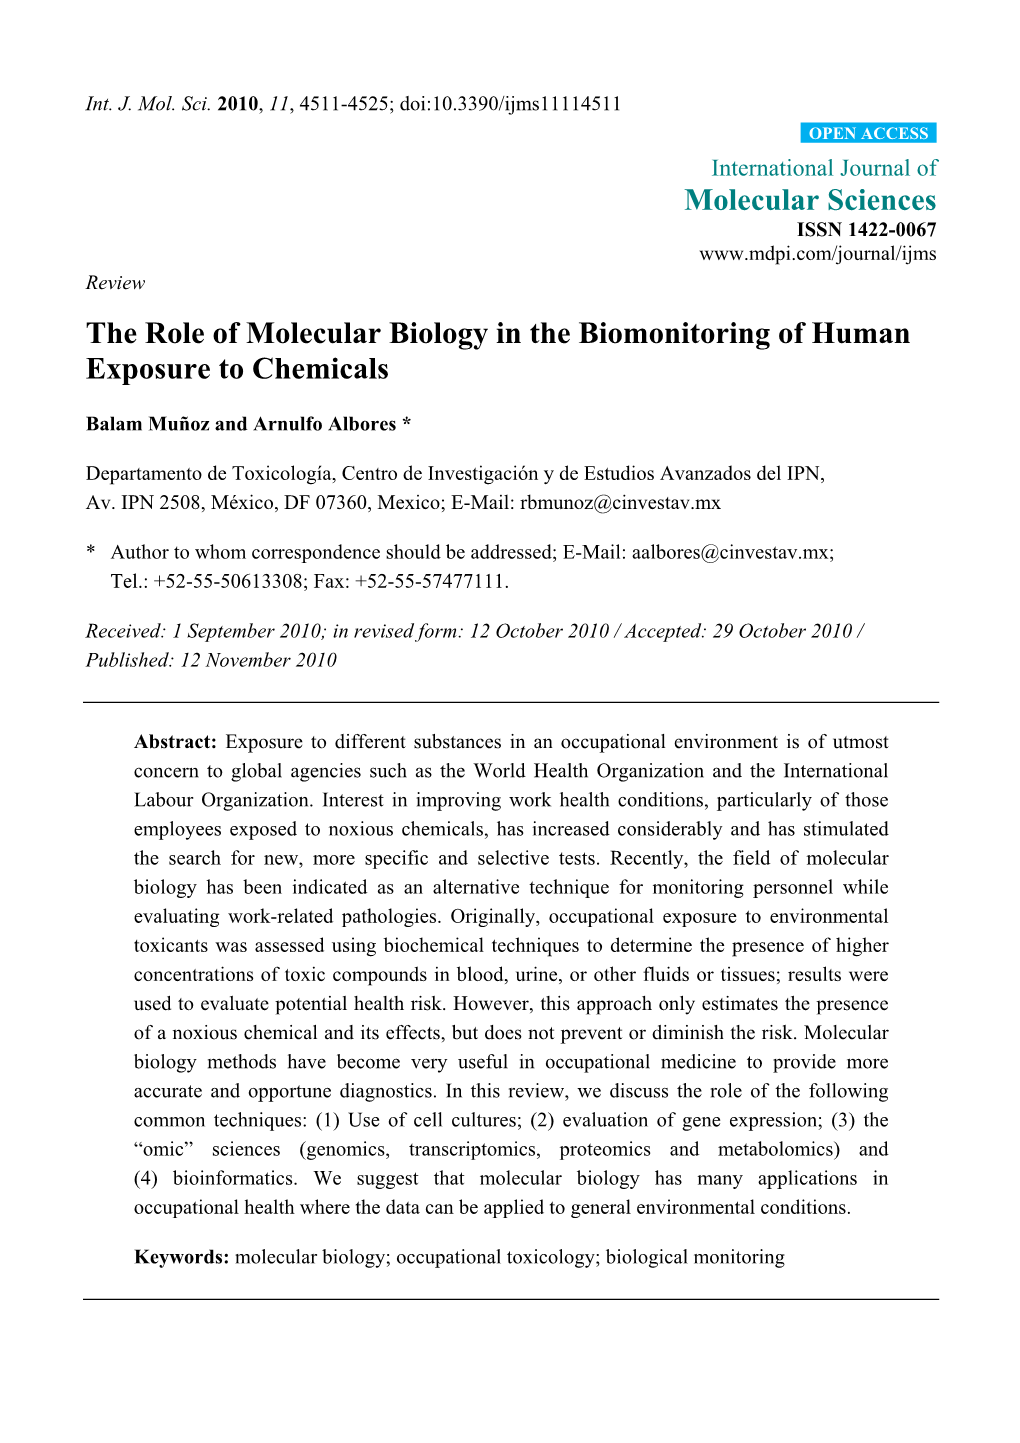 The Role of Molecular Biology in the Biomonitoring of Human Exposure to Chemicals